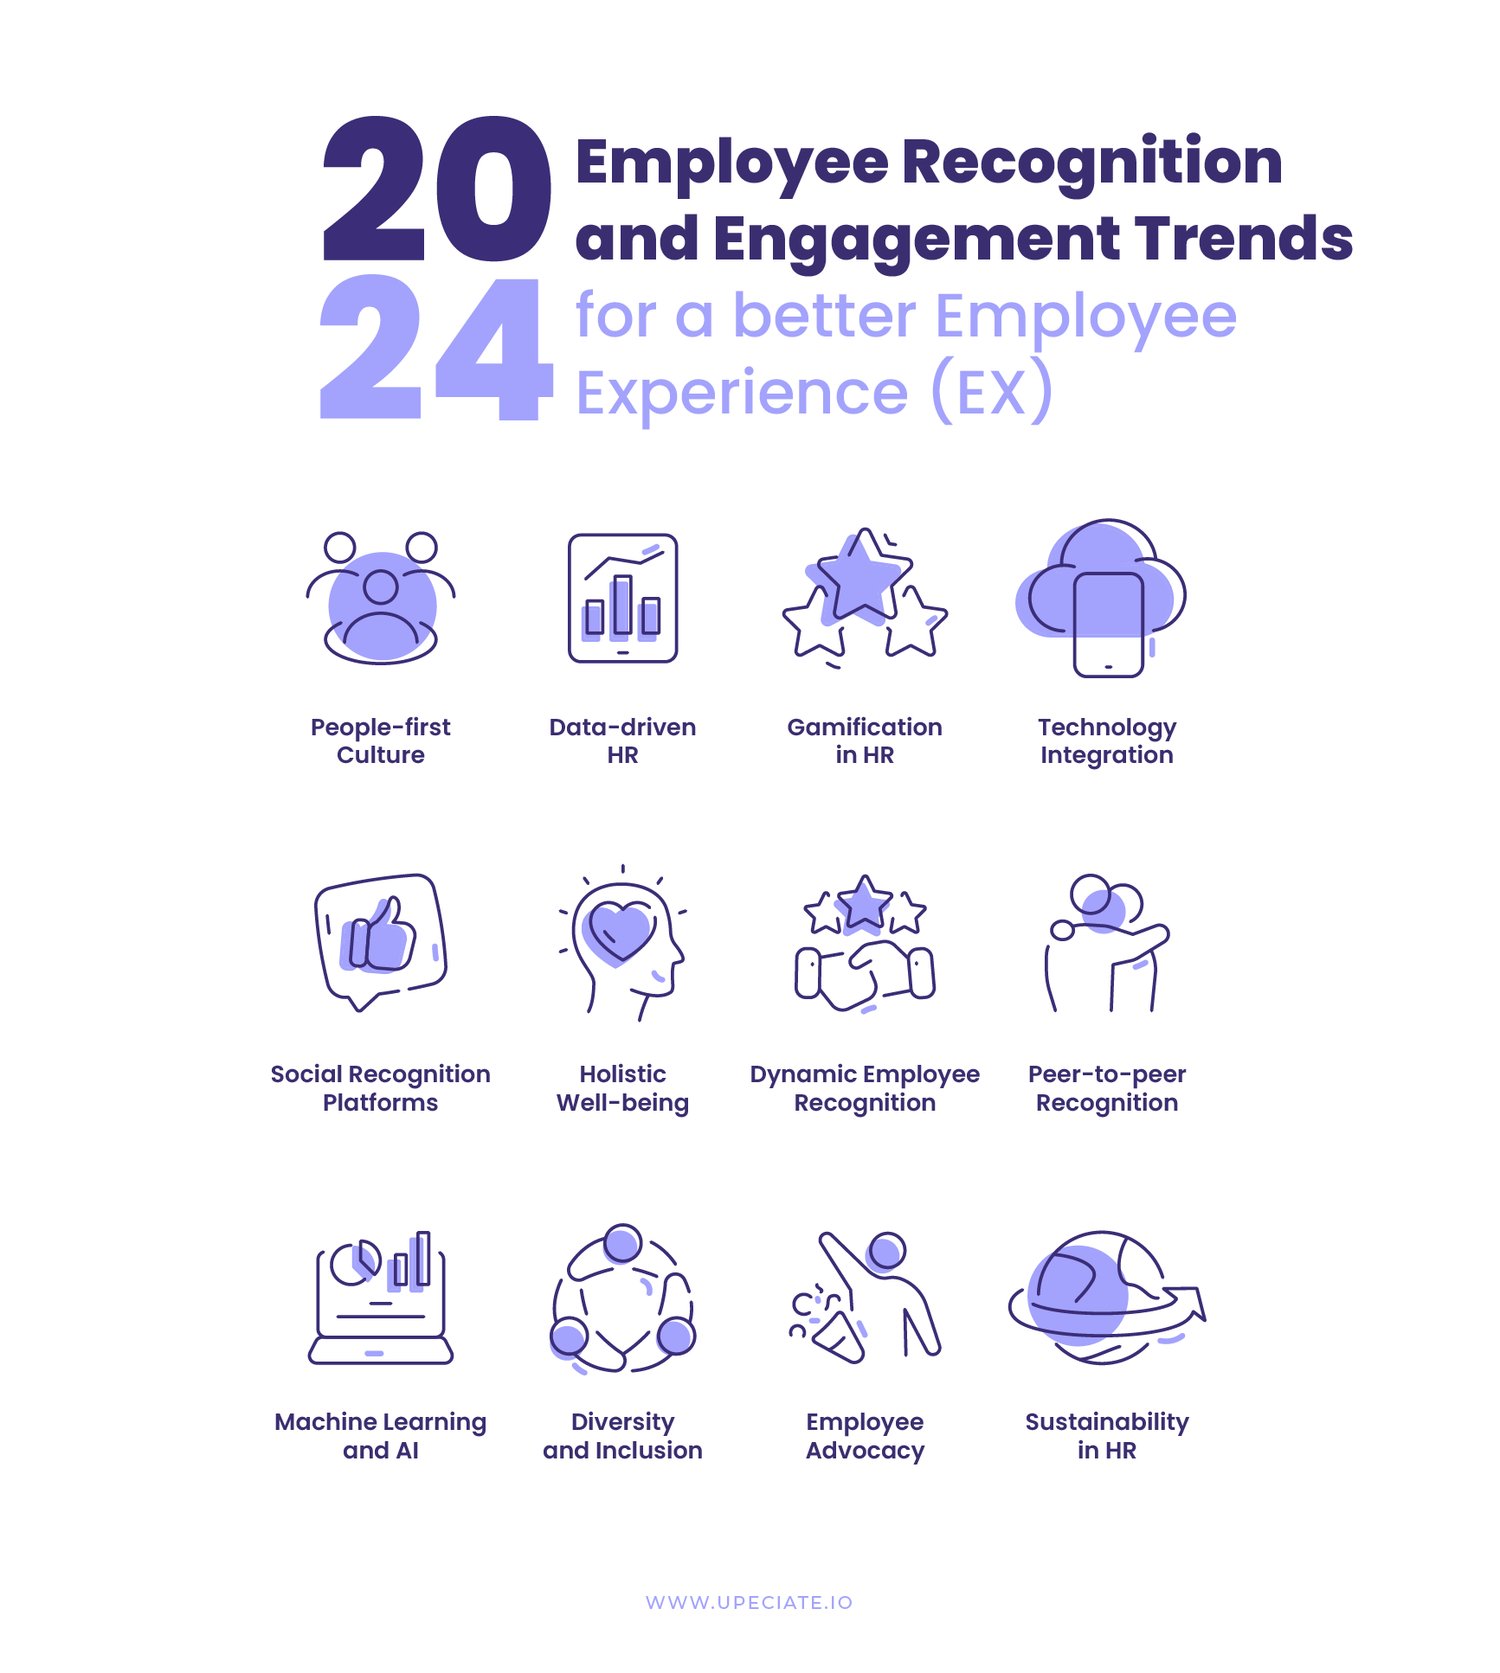 Employee Engagement, Employee Recognition, Employee Engagement Trends, Employee Recognition Trends, Employee Experience